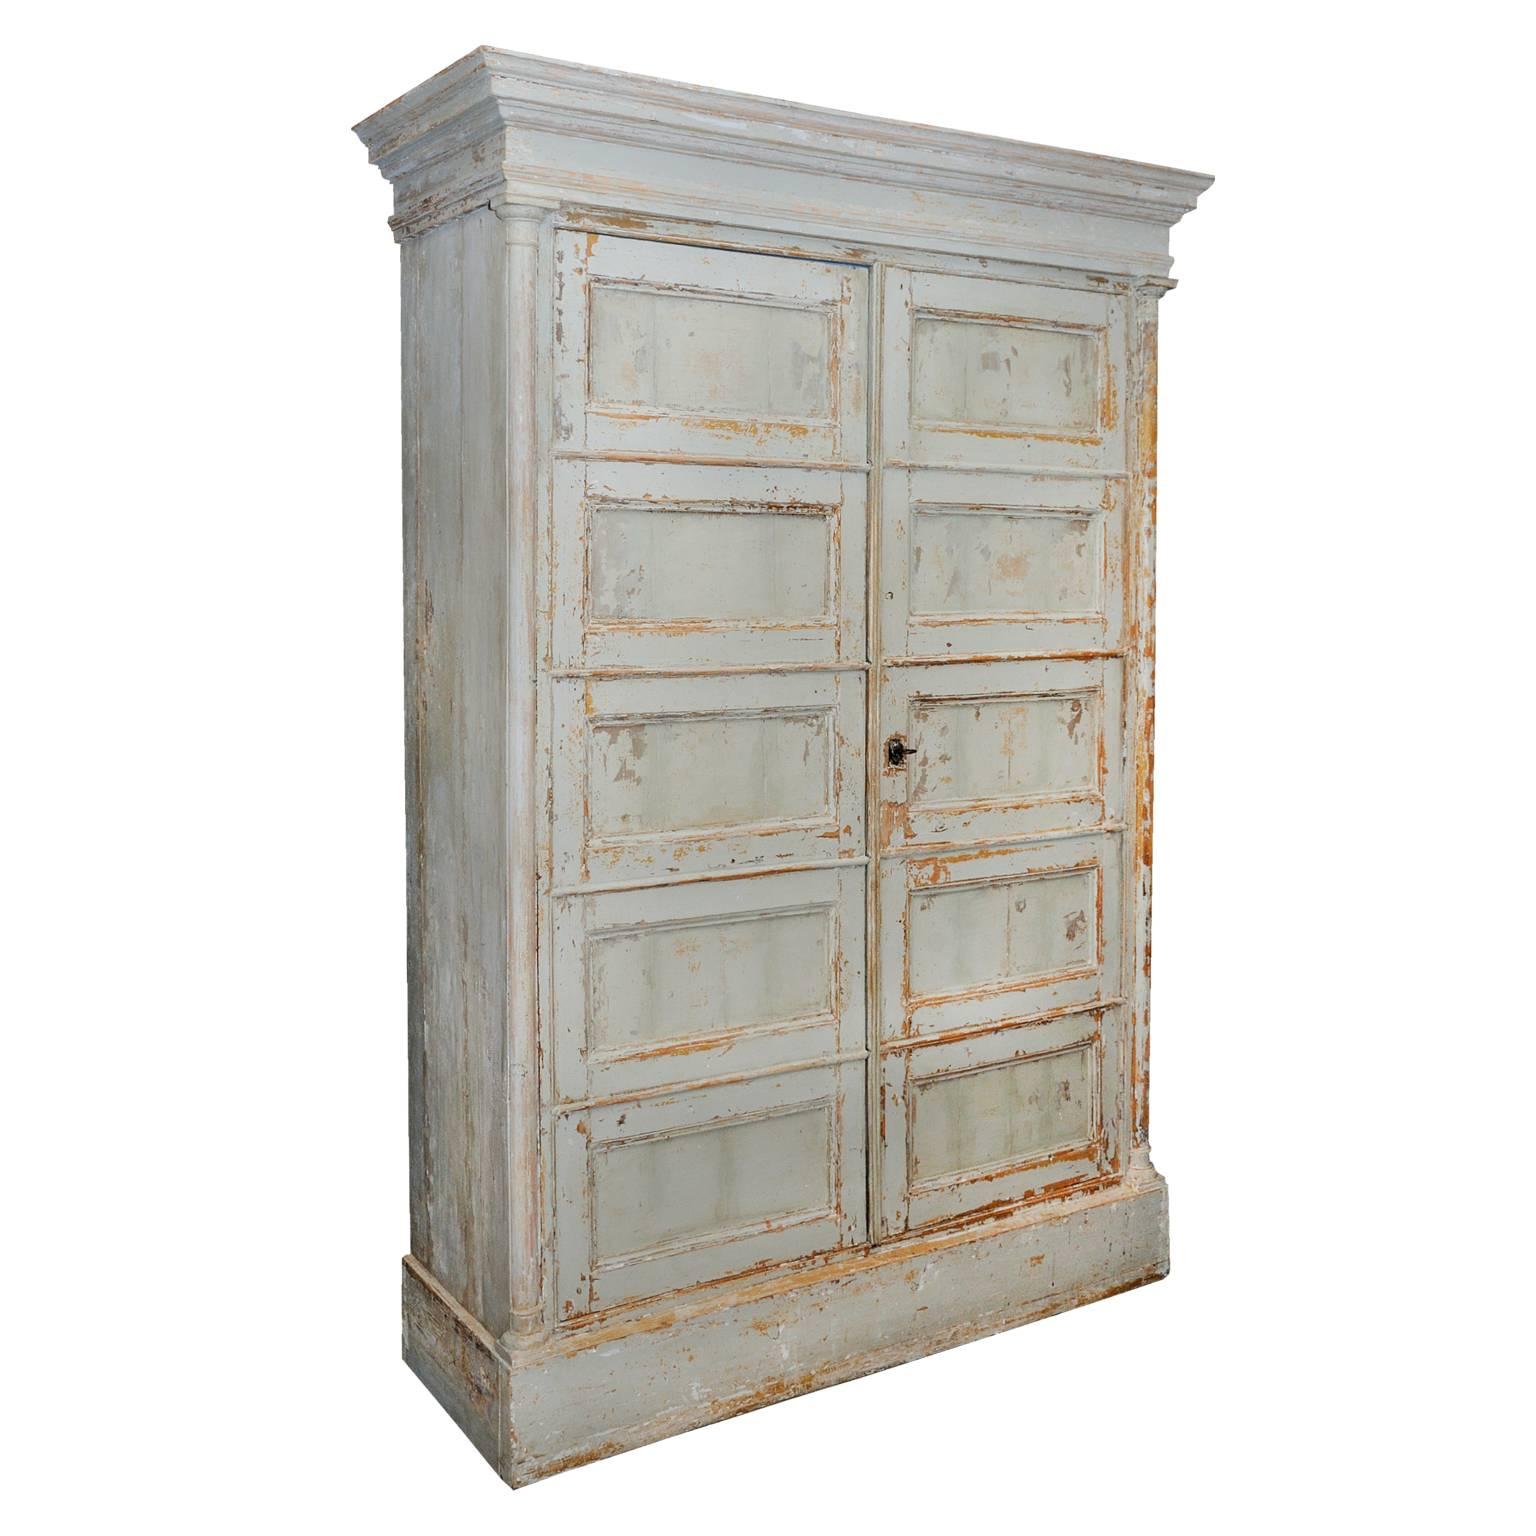 French Directoire dry-scraped painted cupboard, circa 1790.